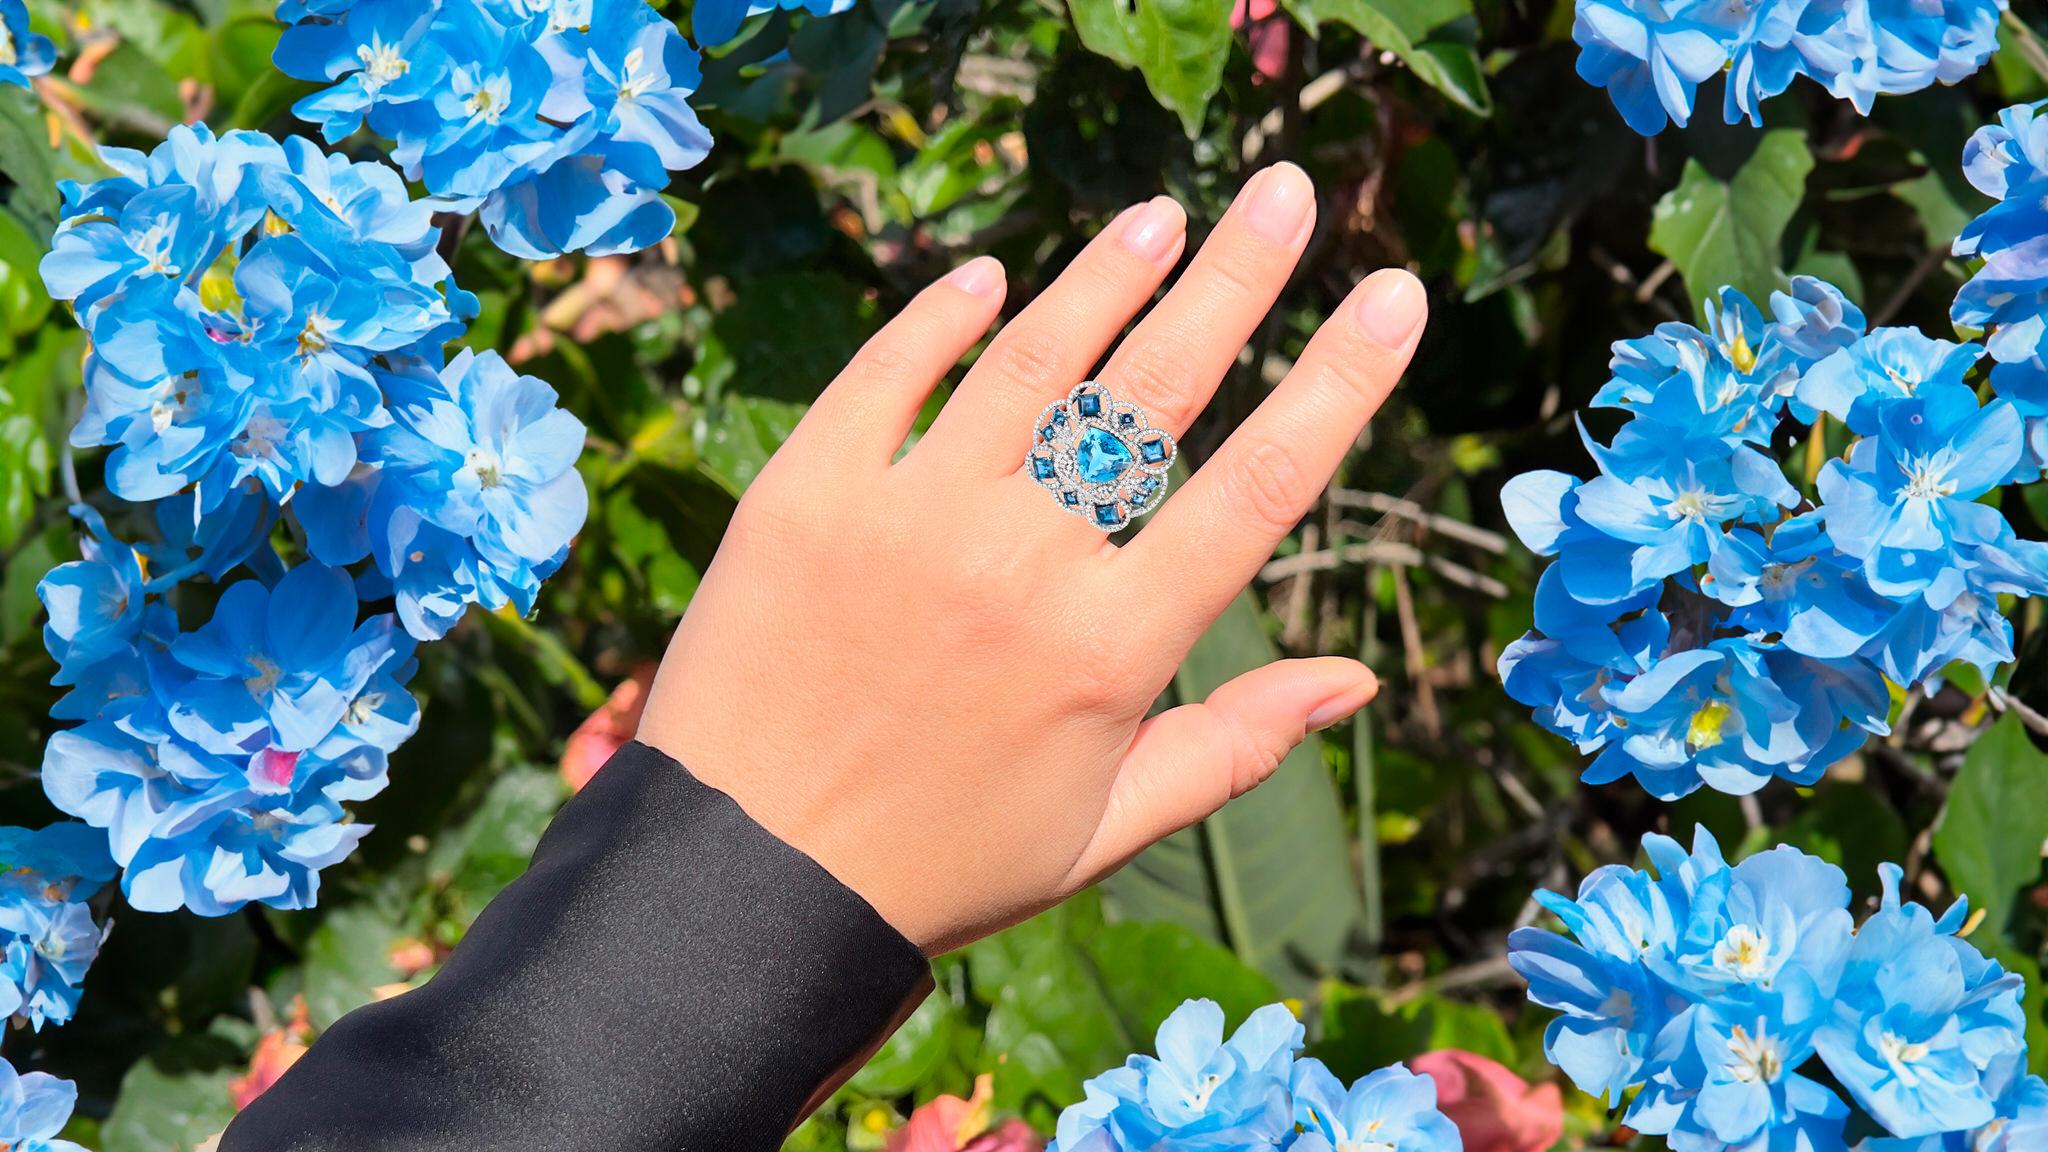 It comes with the Gemological Appraisal by GIA GG/AJP
All Gemstones are Natural
Swiss Blue Topaz = 7.95 Carat
10  London Blue Topazes = 4.30 Carats
218 Diamonds = 1.62 Carats
Metal: Black Rhodium Plated Sterling Silver
Ring Size: 7.5* US
*It can be